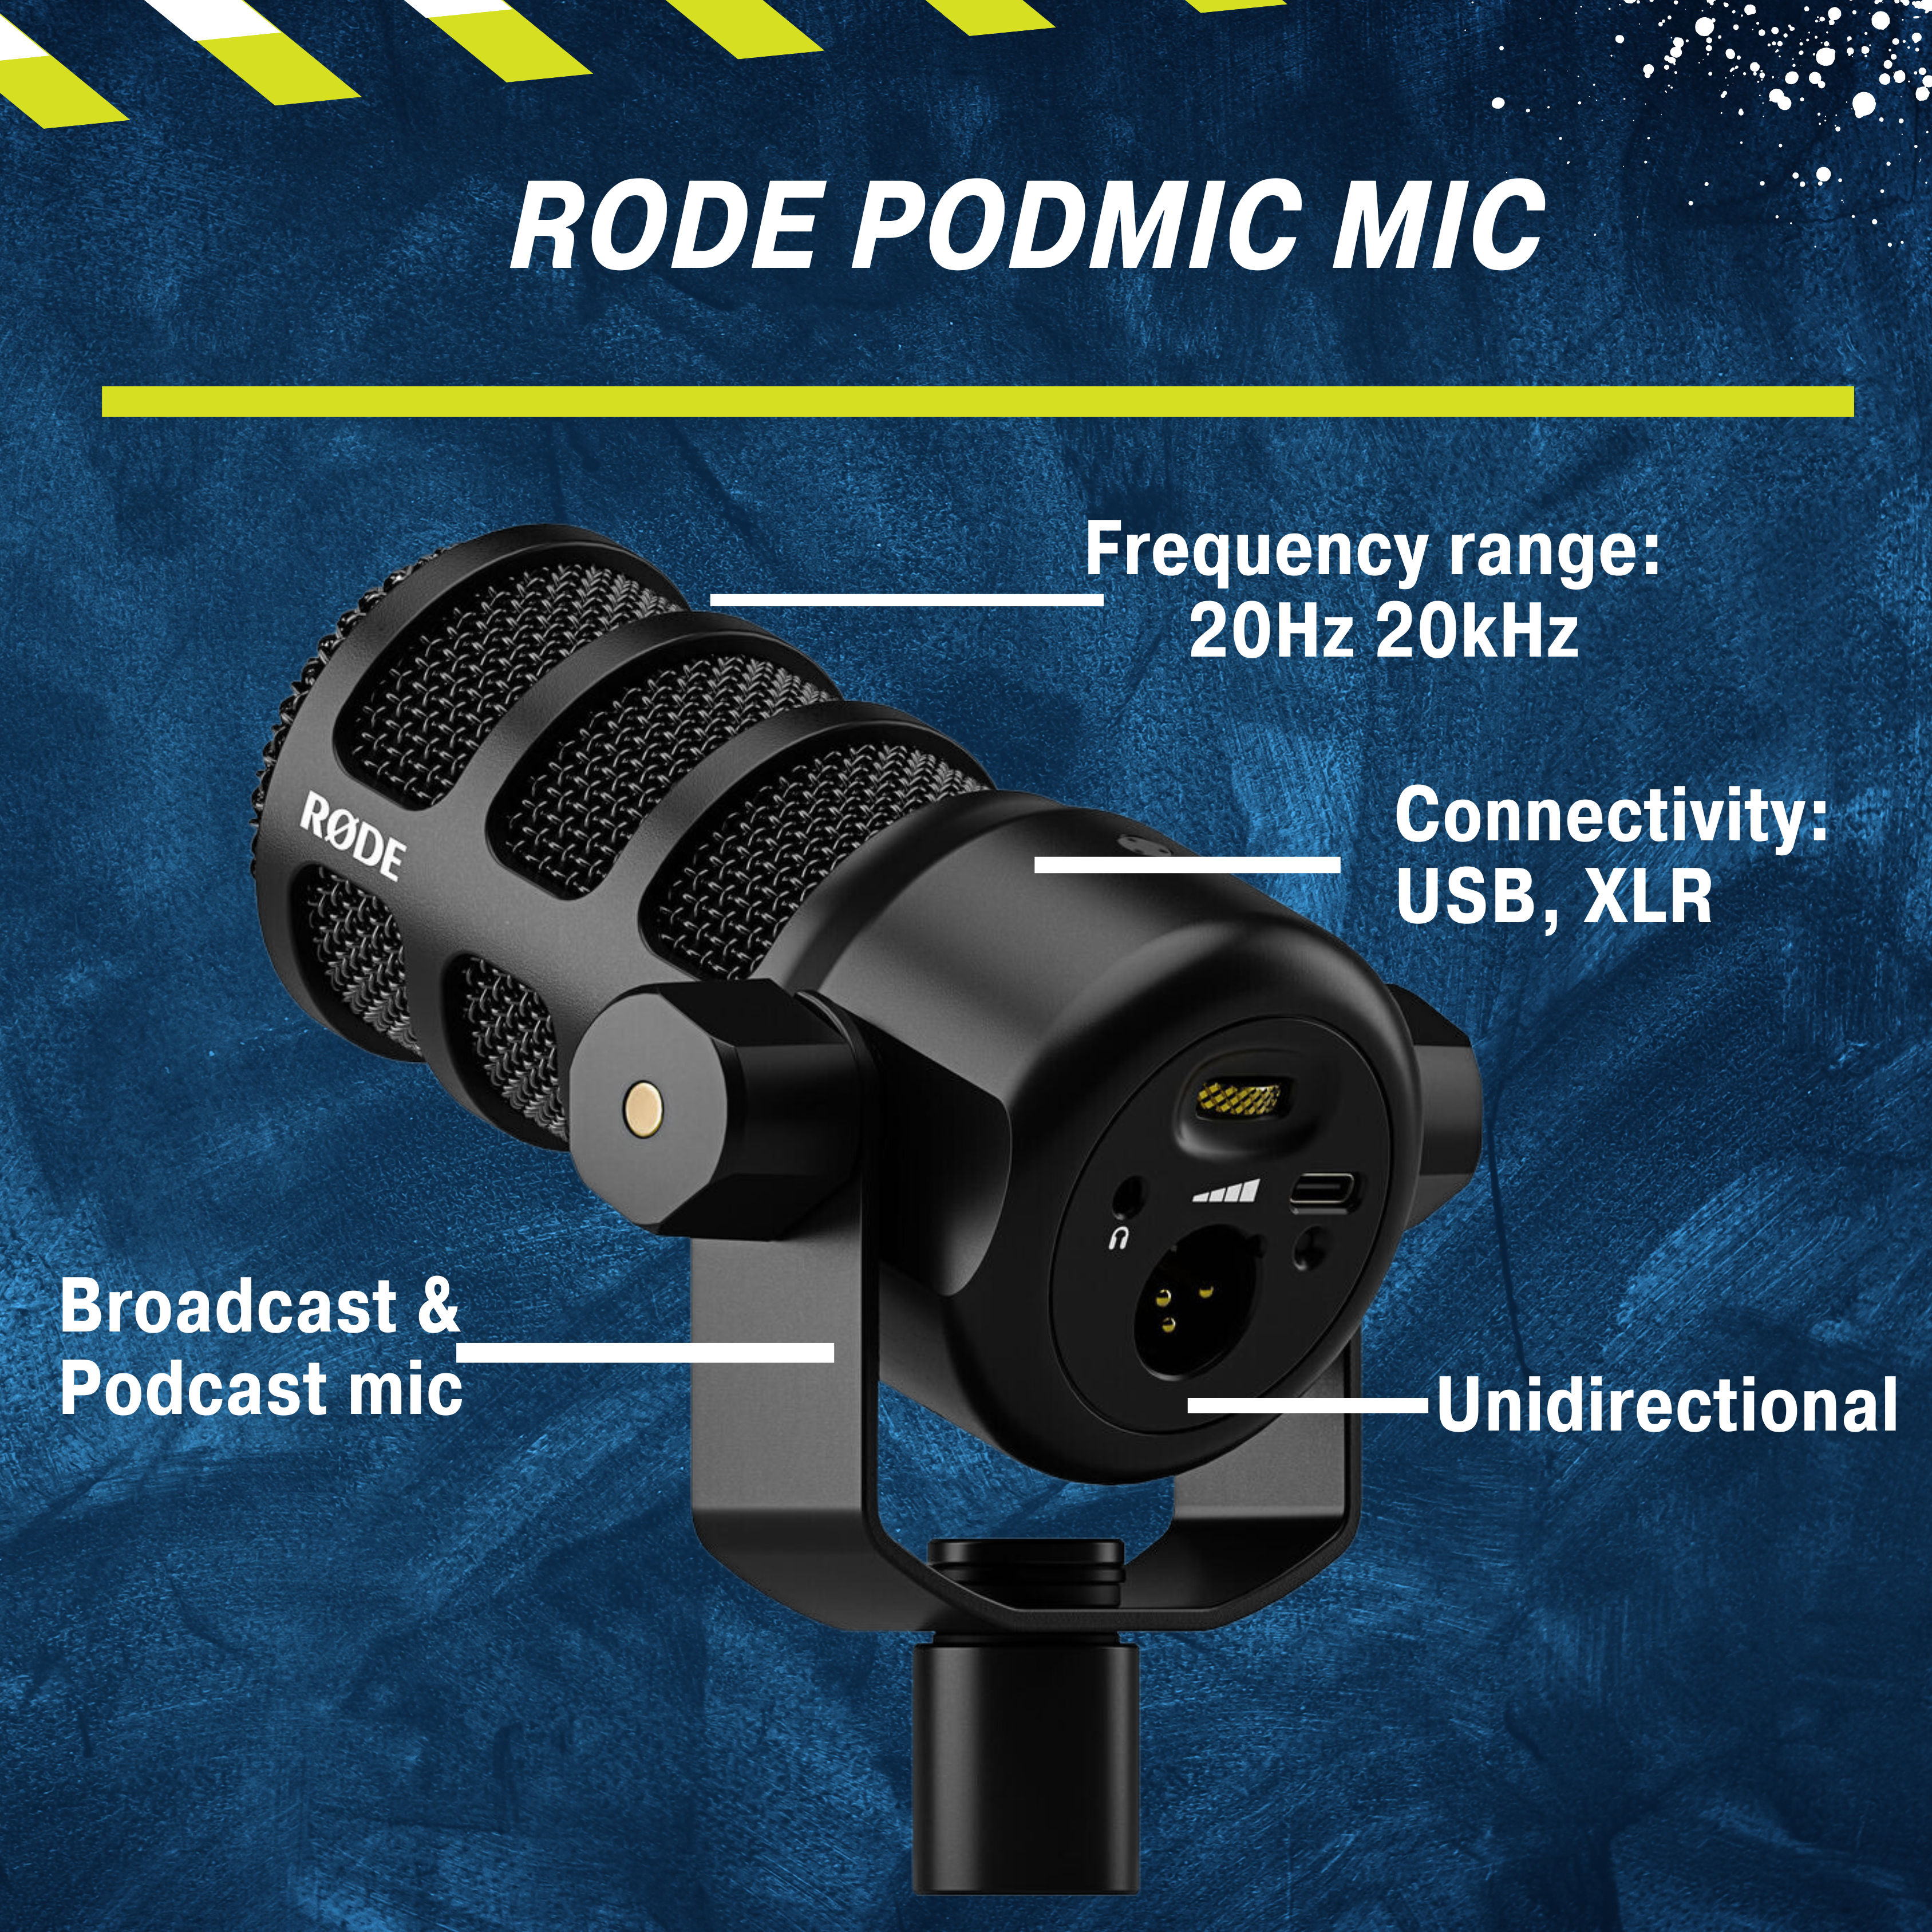 This is an image of Rode Podmic Mic on rent offered by SharePal.in